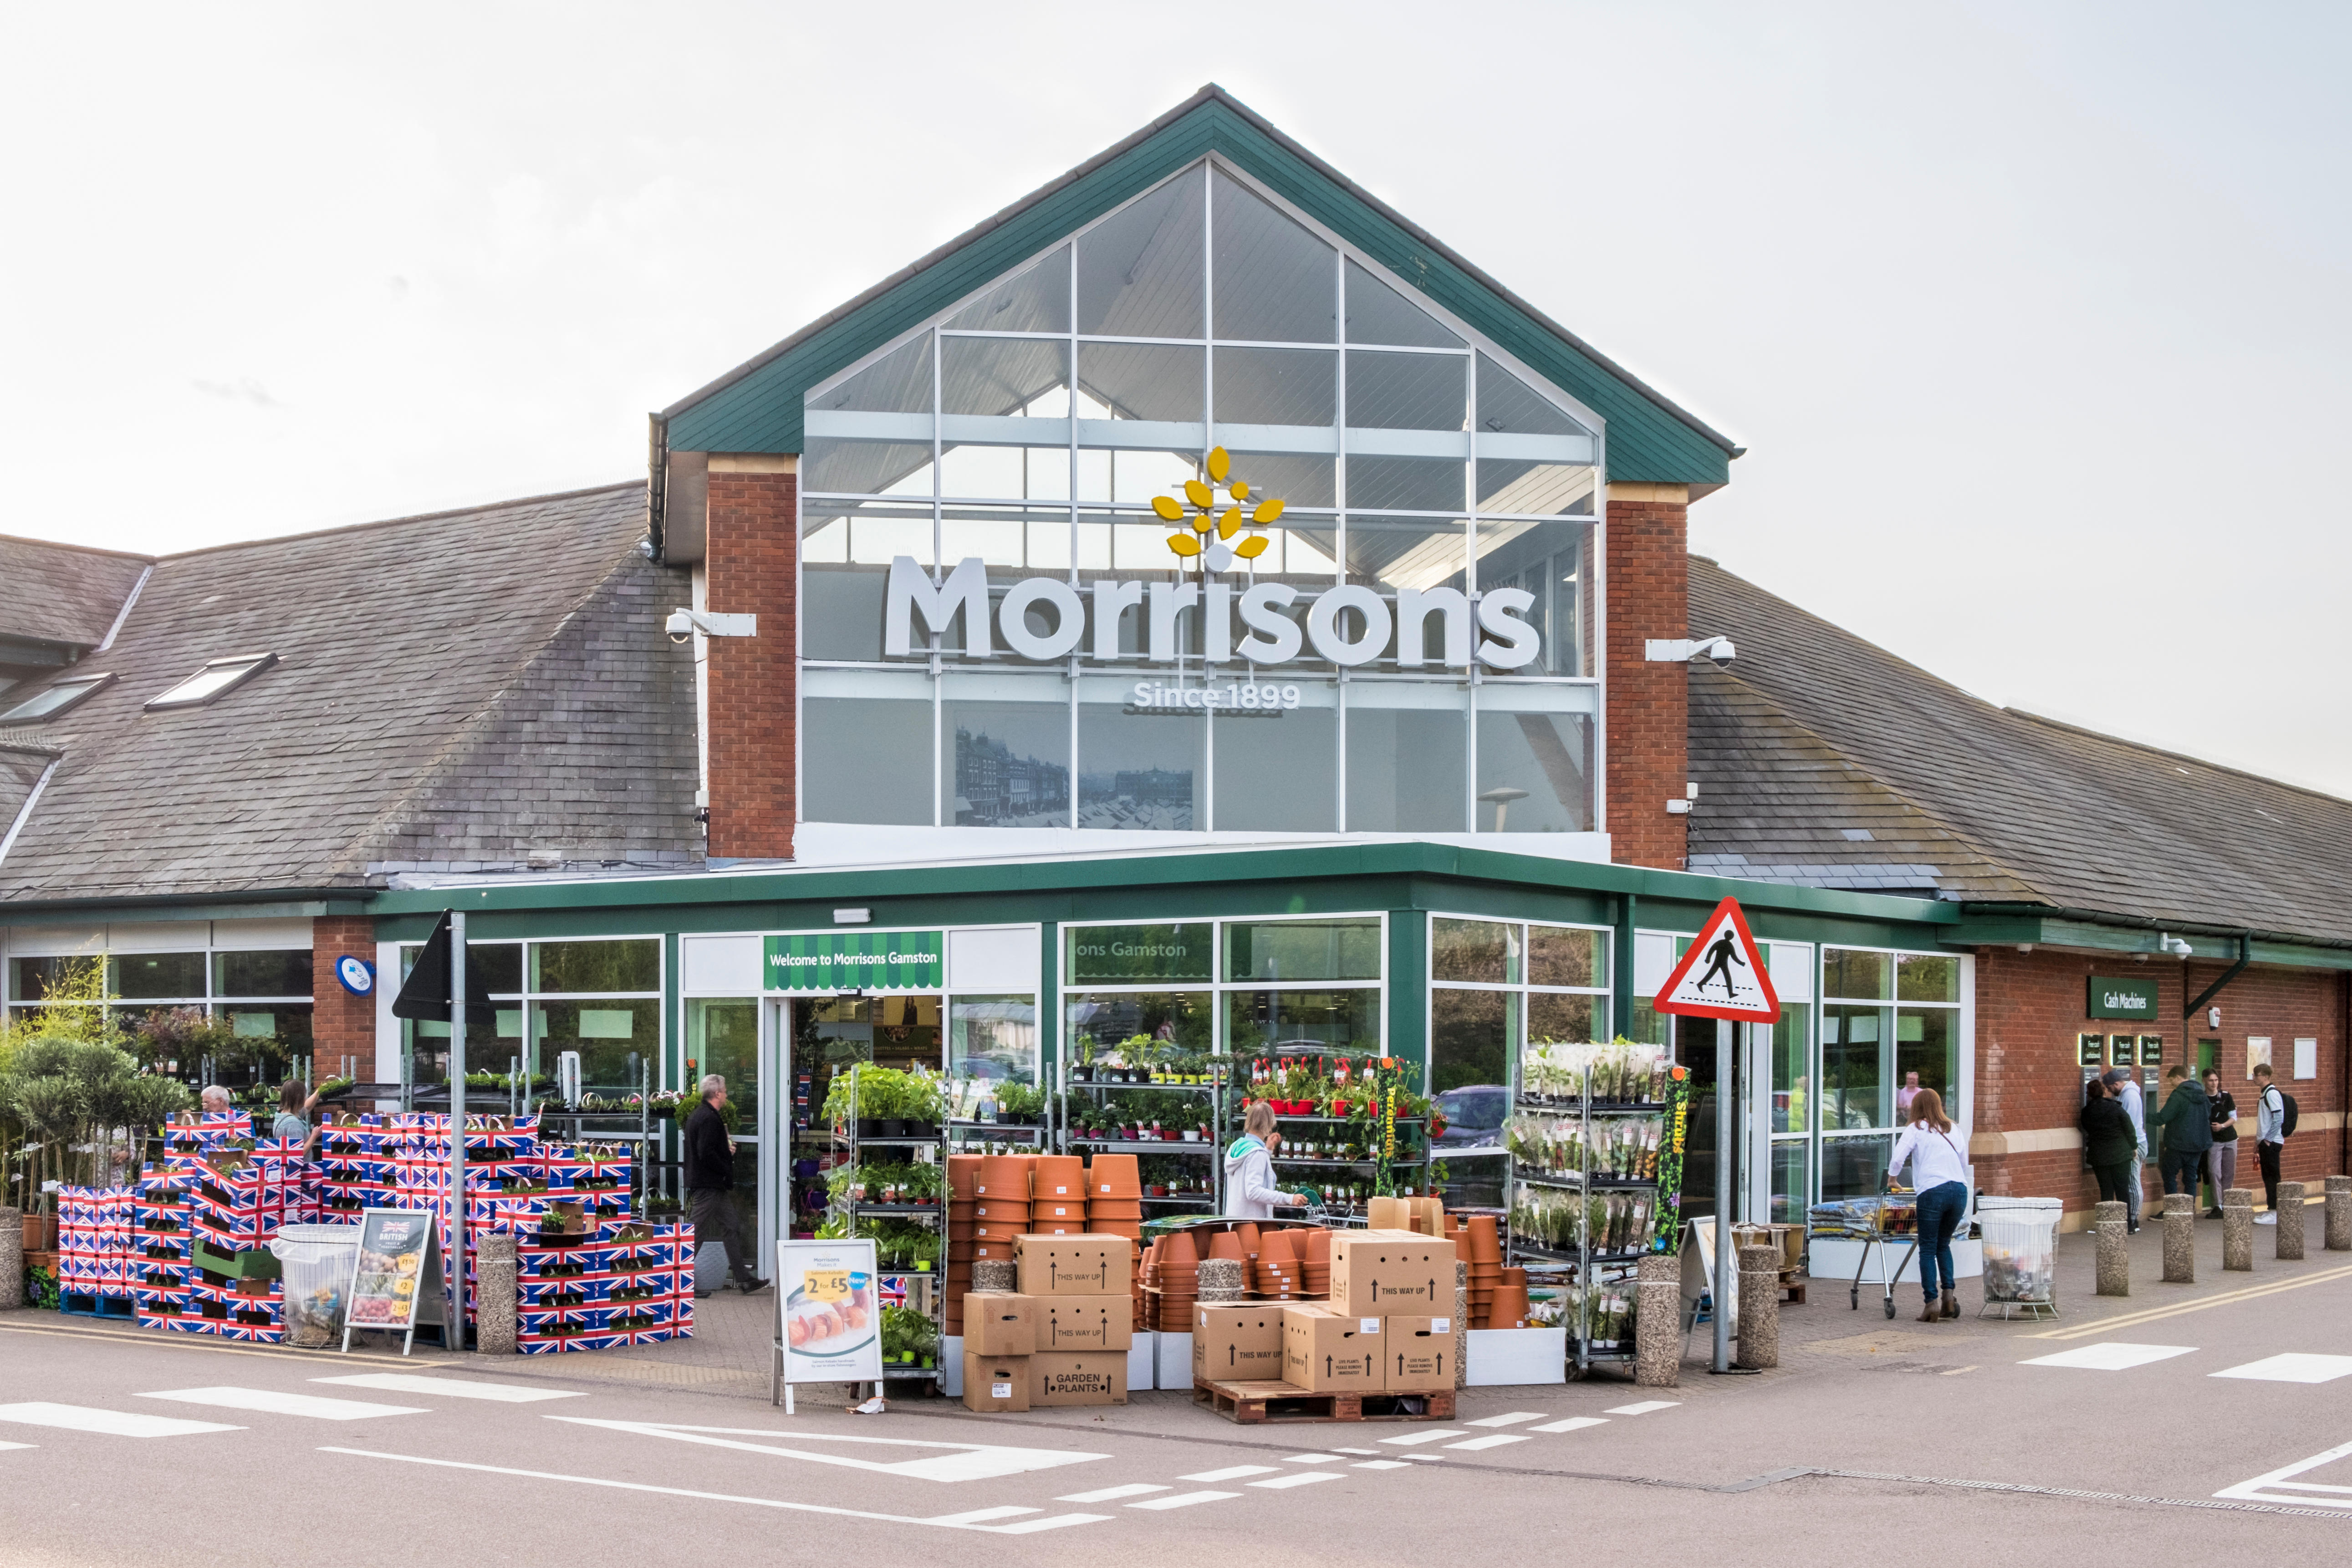 If you're looking to nab a similar bargain, Morrisons could just be worth a visit